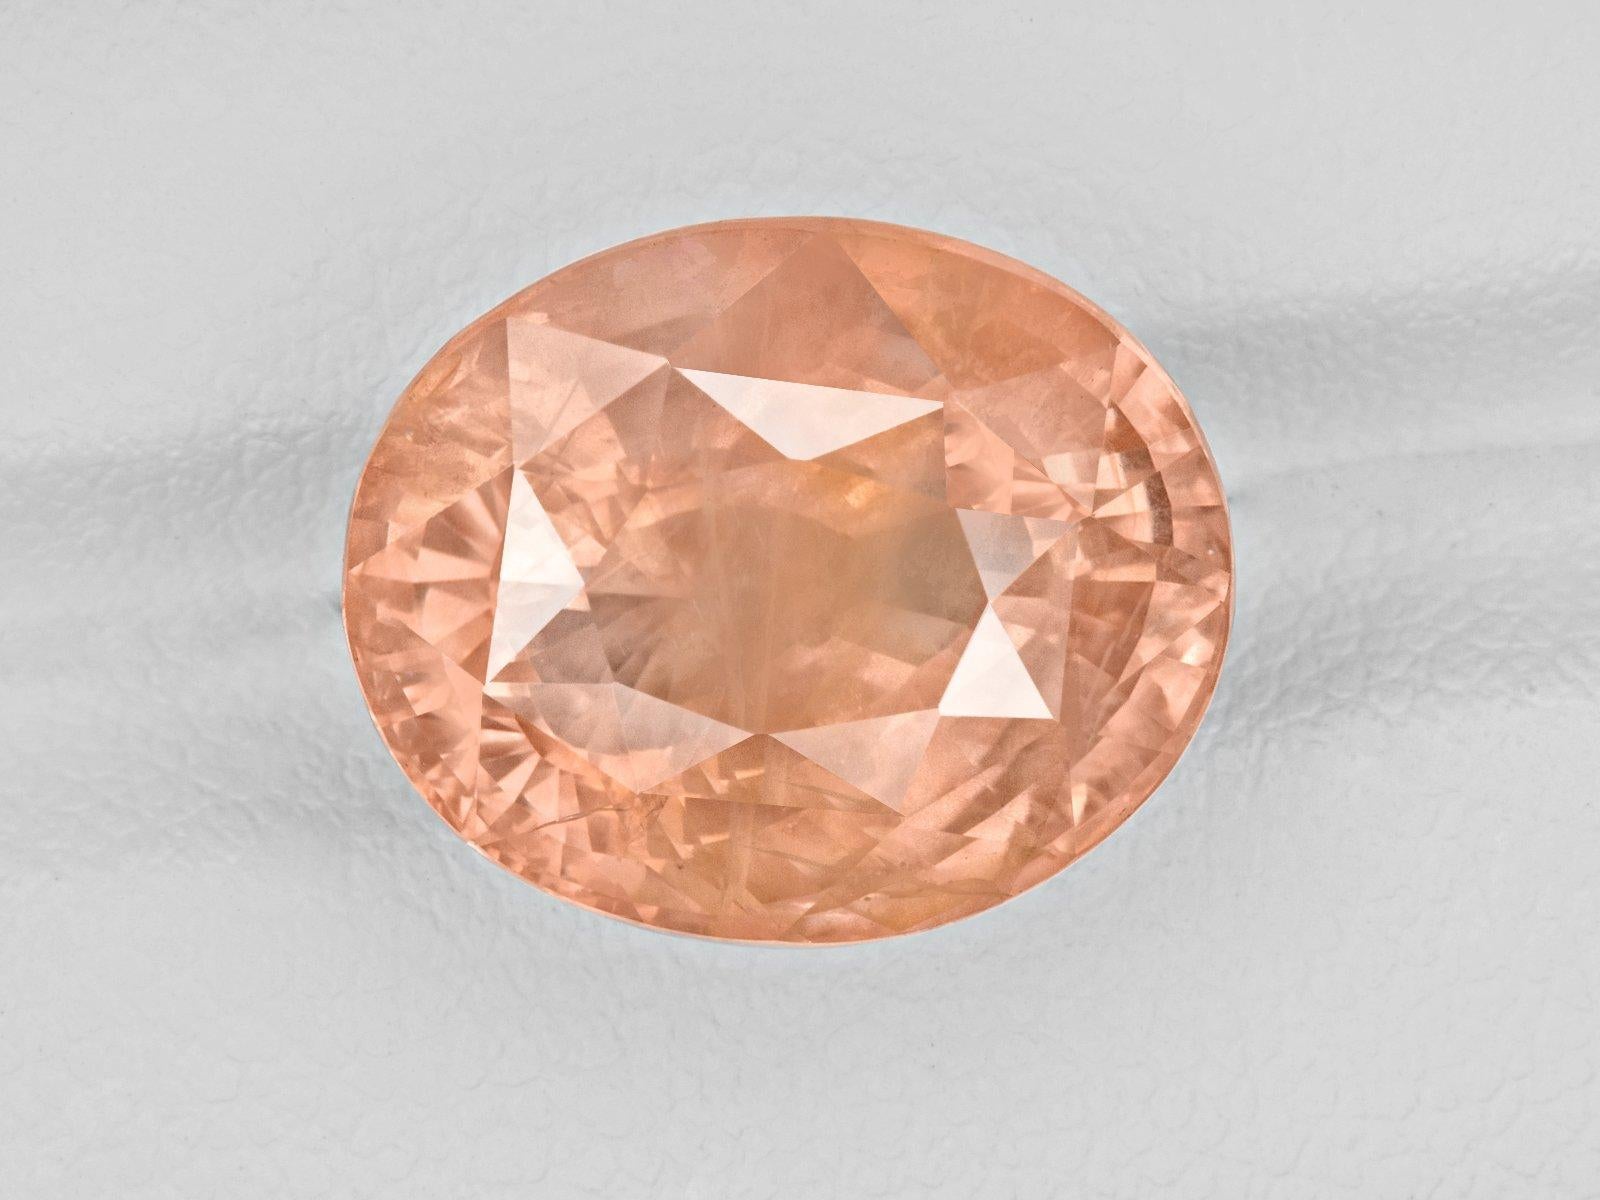 A true exquisite sapphire this ring features a rare sunset orange with pink hue Padparadscha sapphire weighing 13 carats. Certified by one of the most reputable laboratories worldwide GRS Switzerland as a true Padparadscha this rare stone is